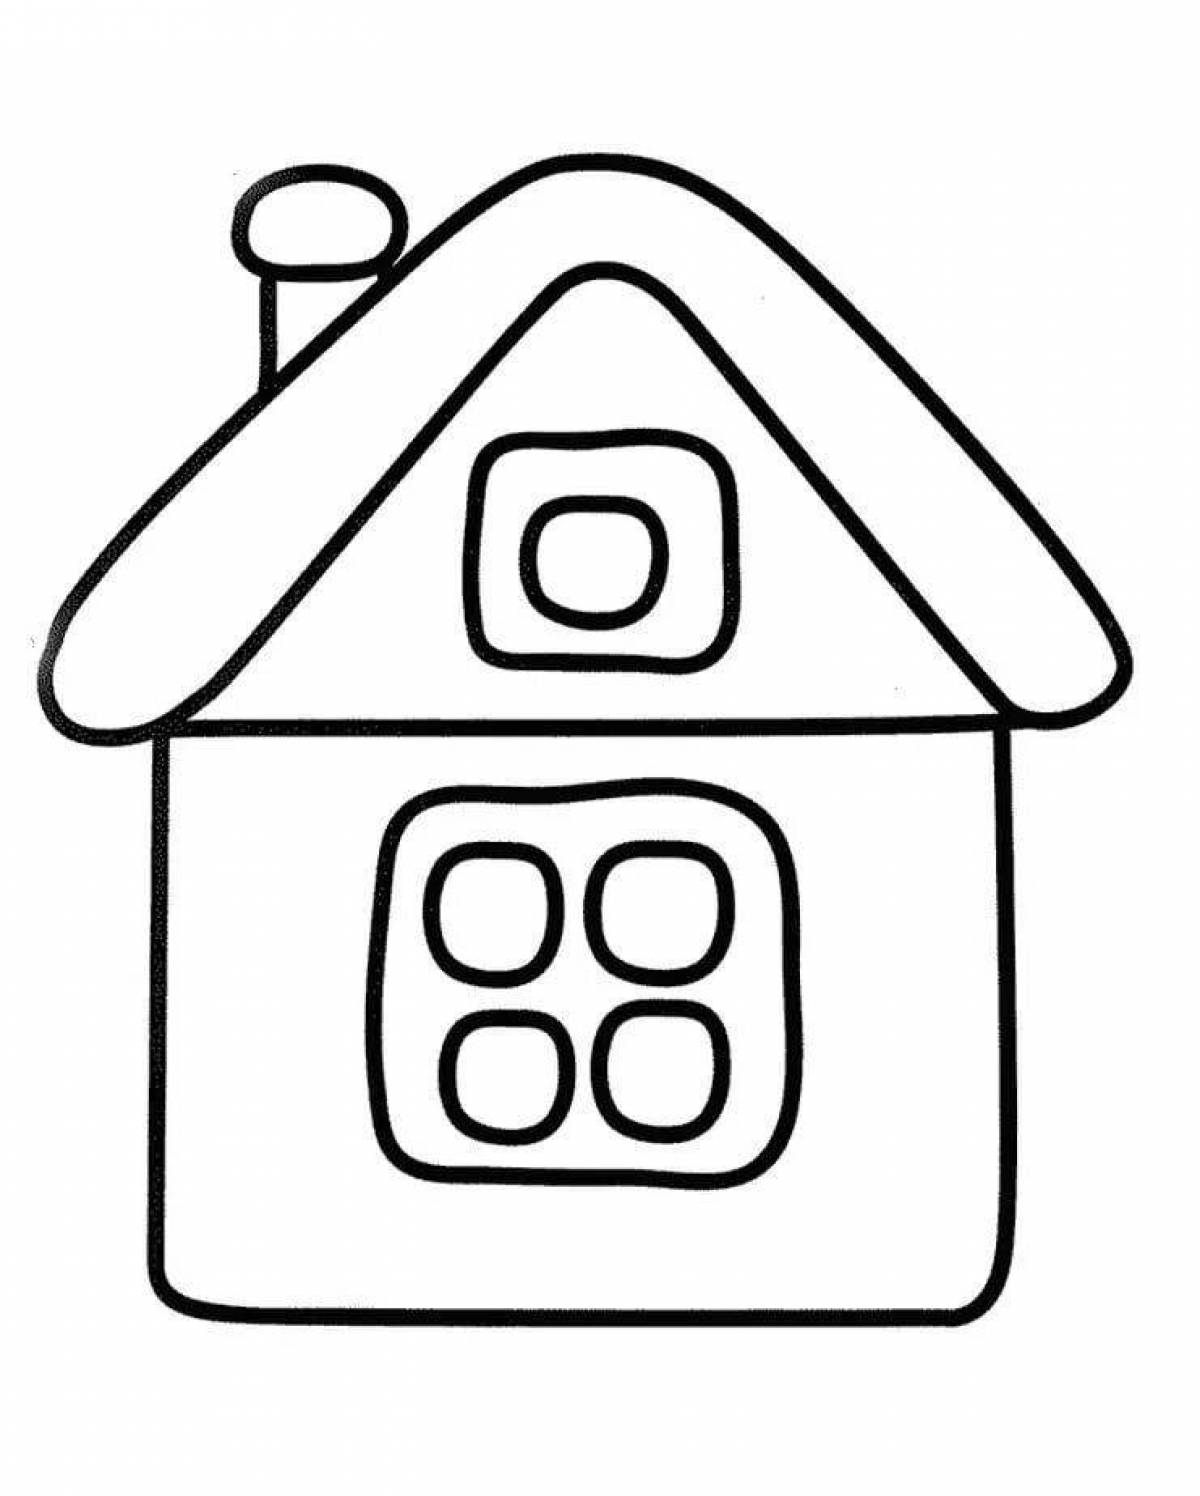 Coloring pages outstanding houses for kids